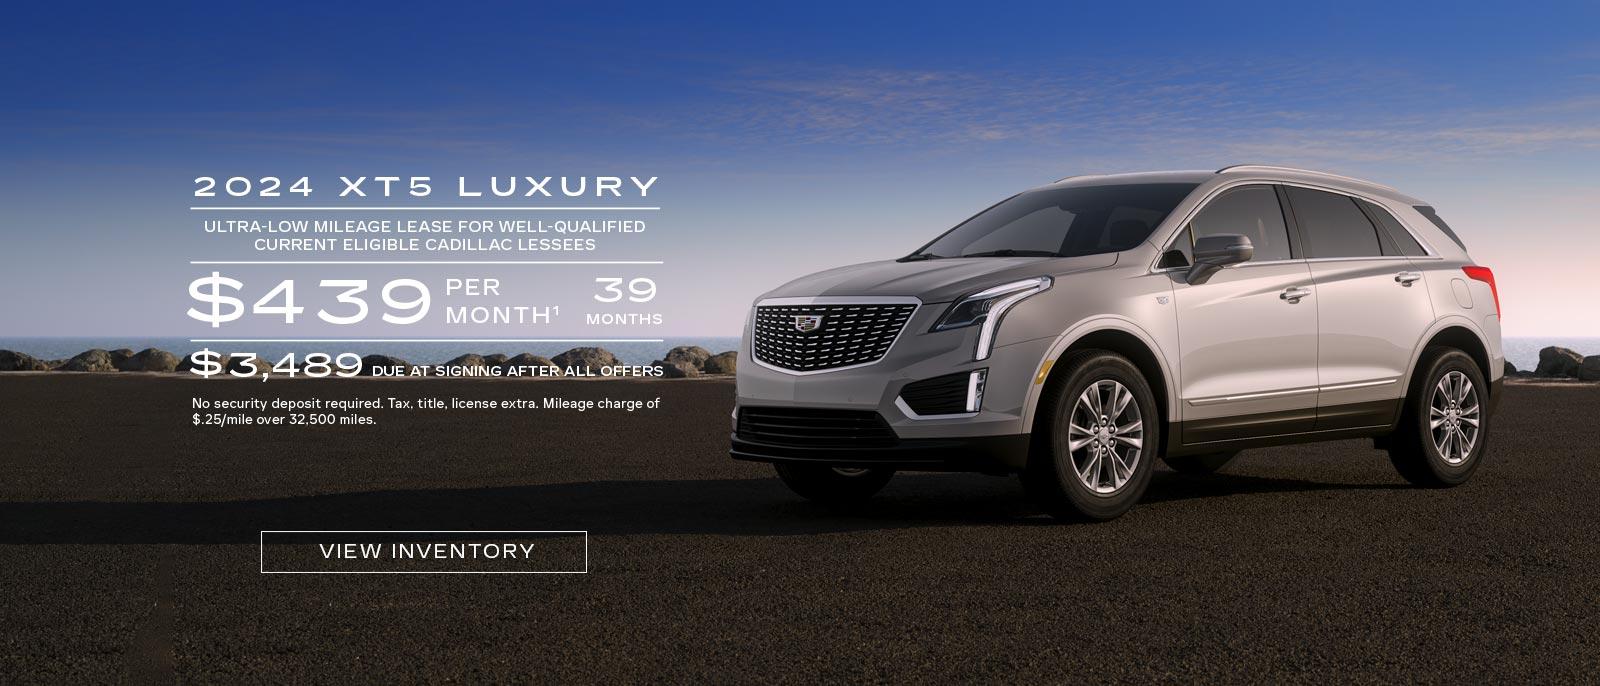 2024 XT5 Luxury. Ultra-low mileage lease for well-qualified current eligible Cadillac lessees. $439 per month. 39 months. $3,489 due at signing after all offers.